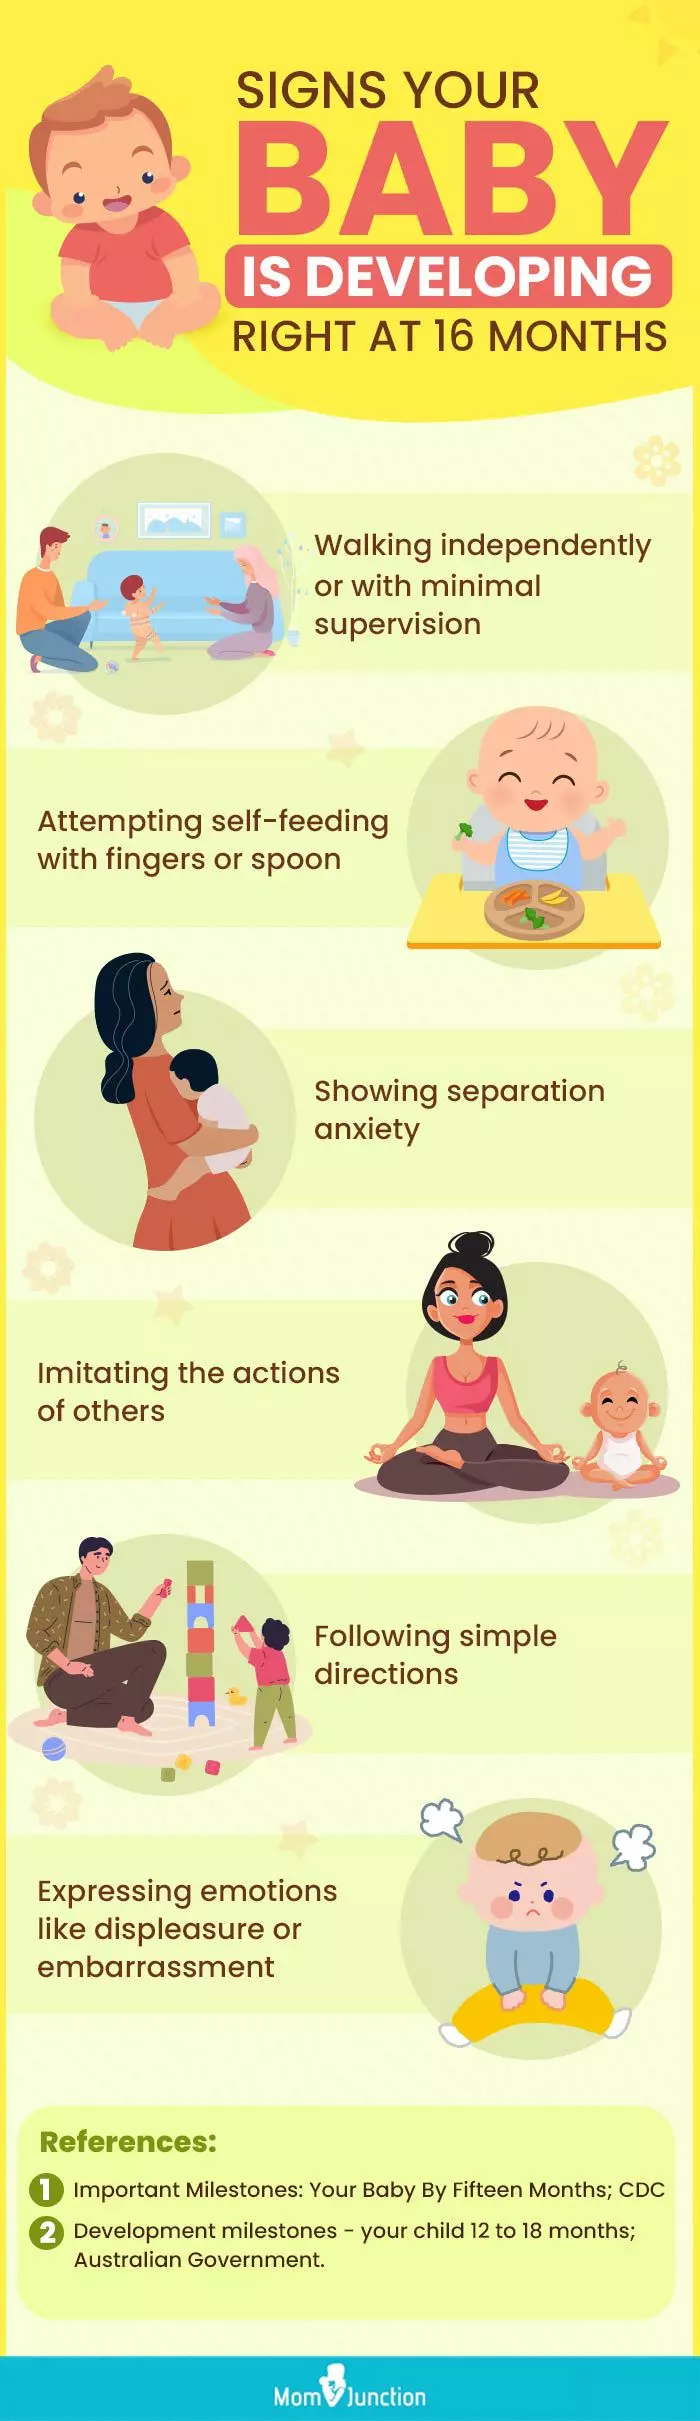 signs your baby is developing right at 16 months (infographic) 